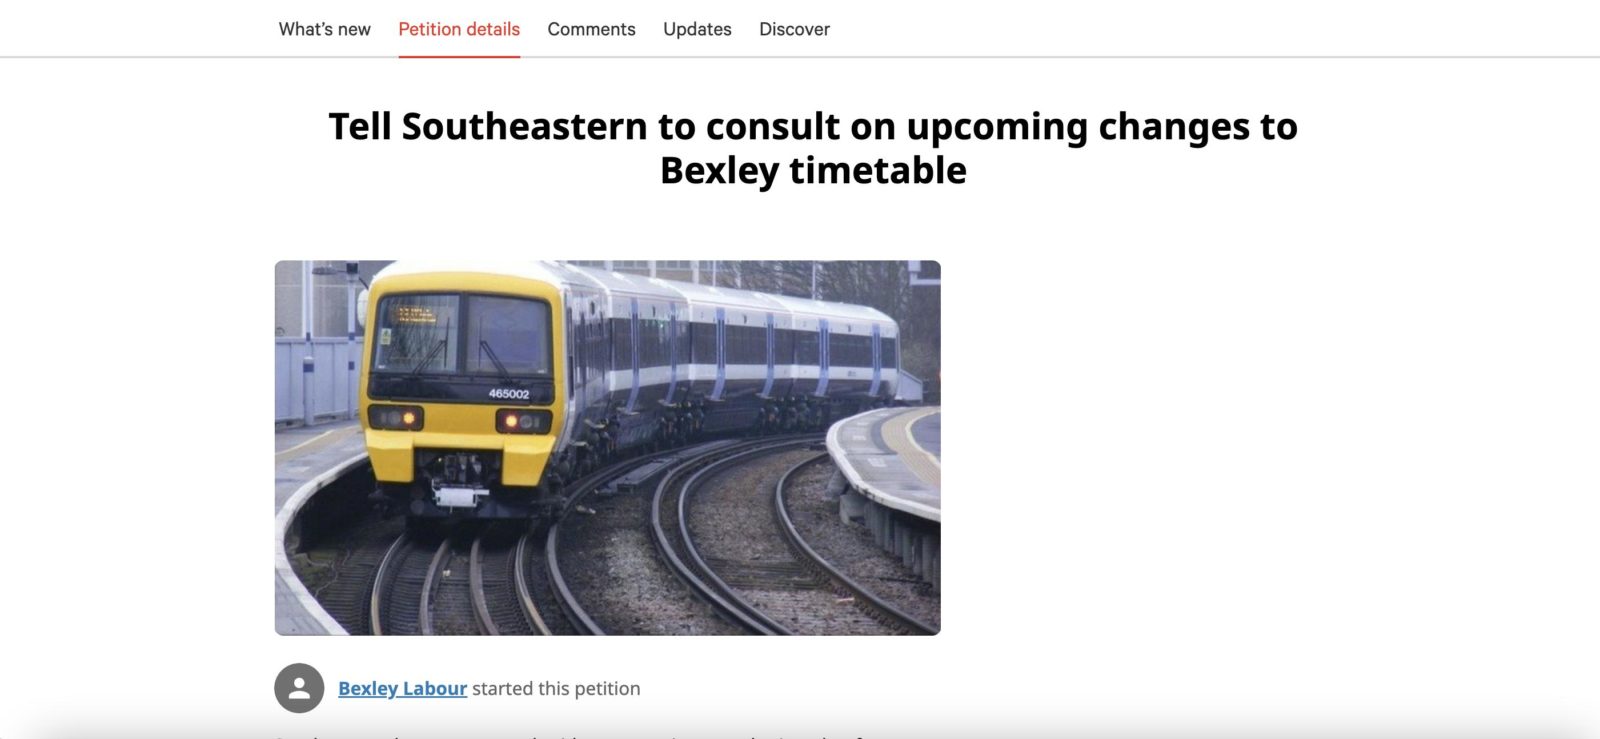 Petition for Southeastern consultation